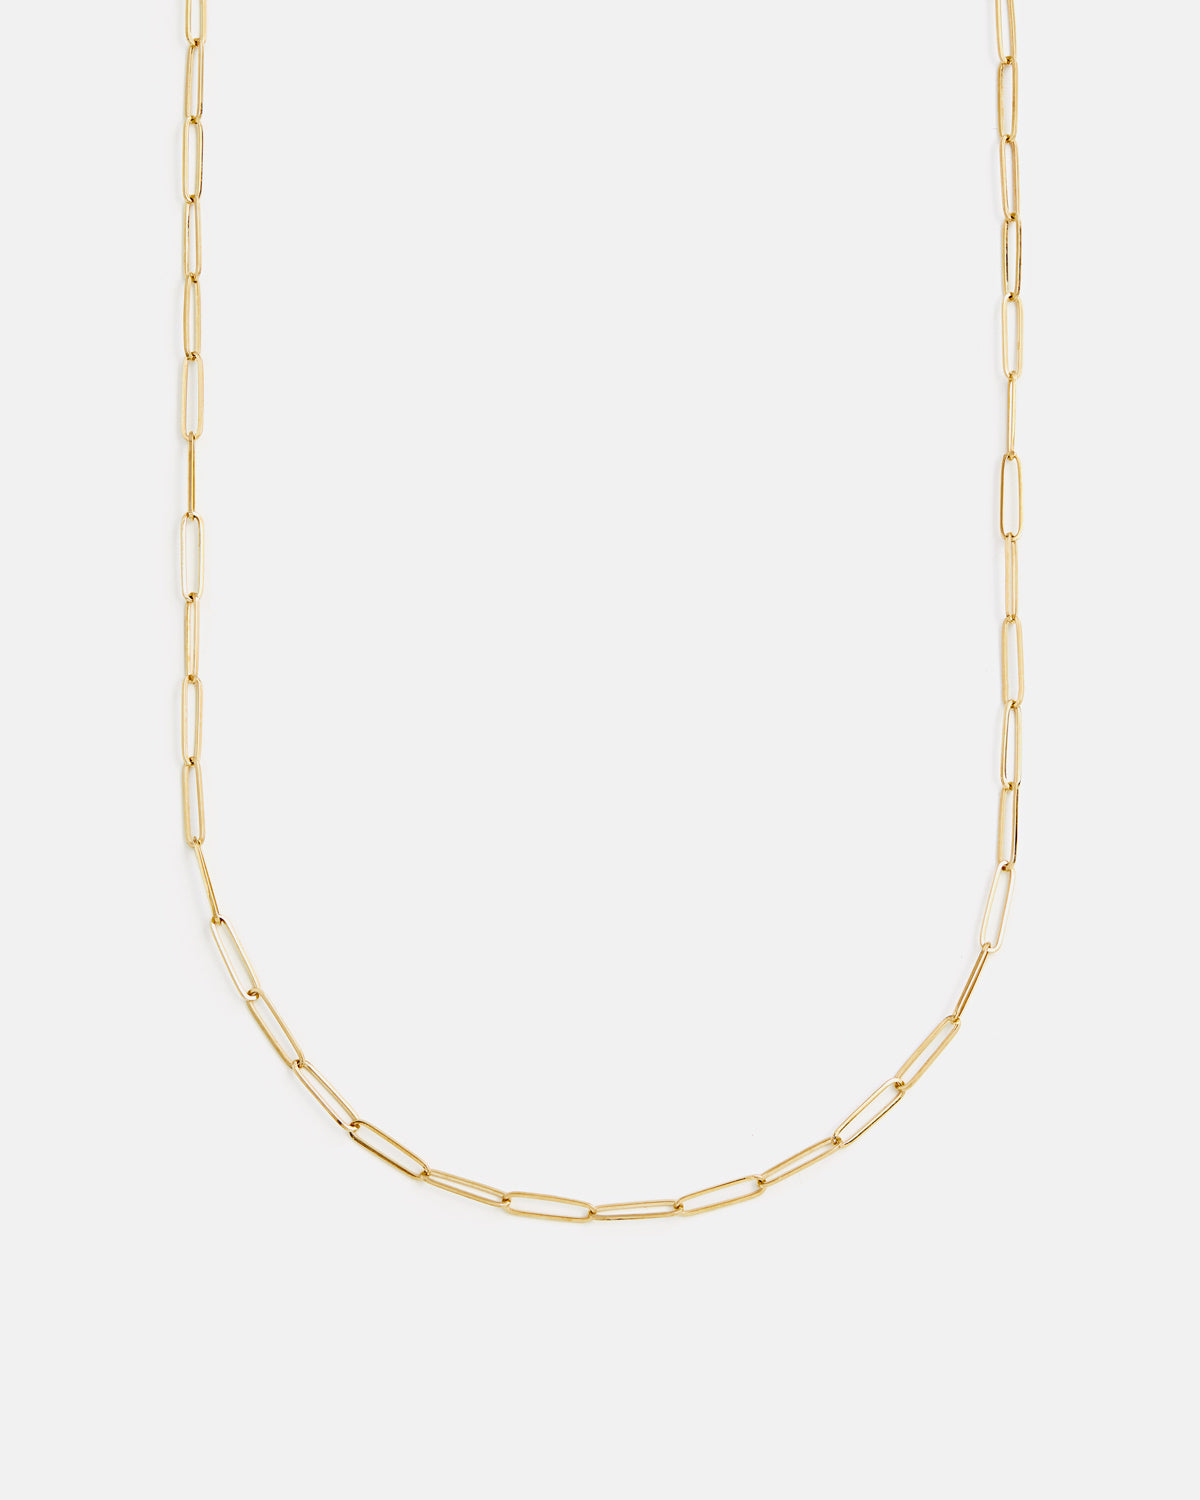 Paper Clip Chain in 14k Yellow Gold